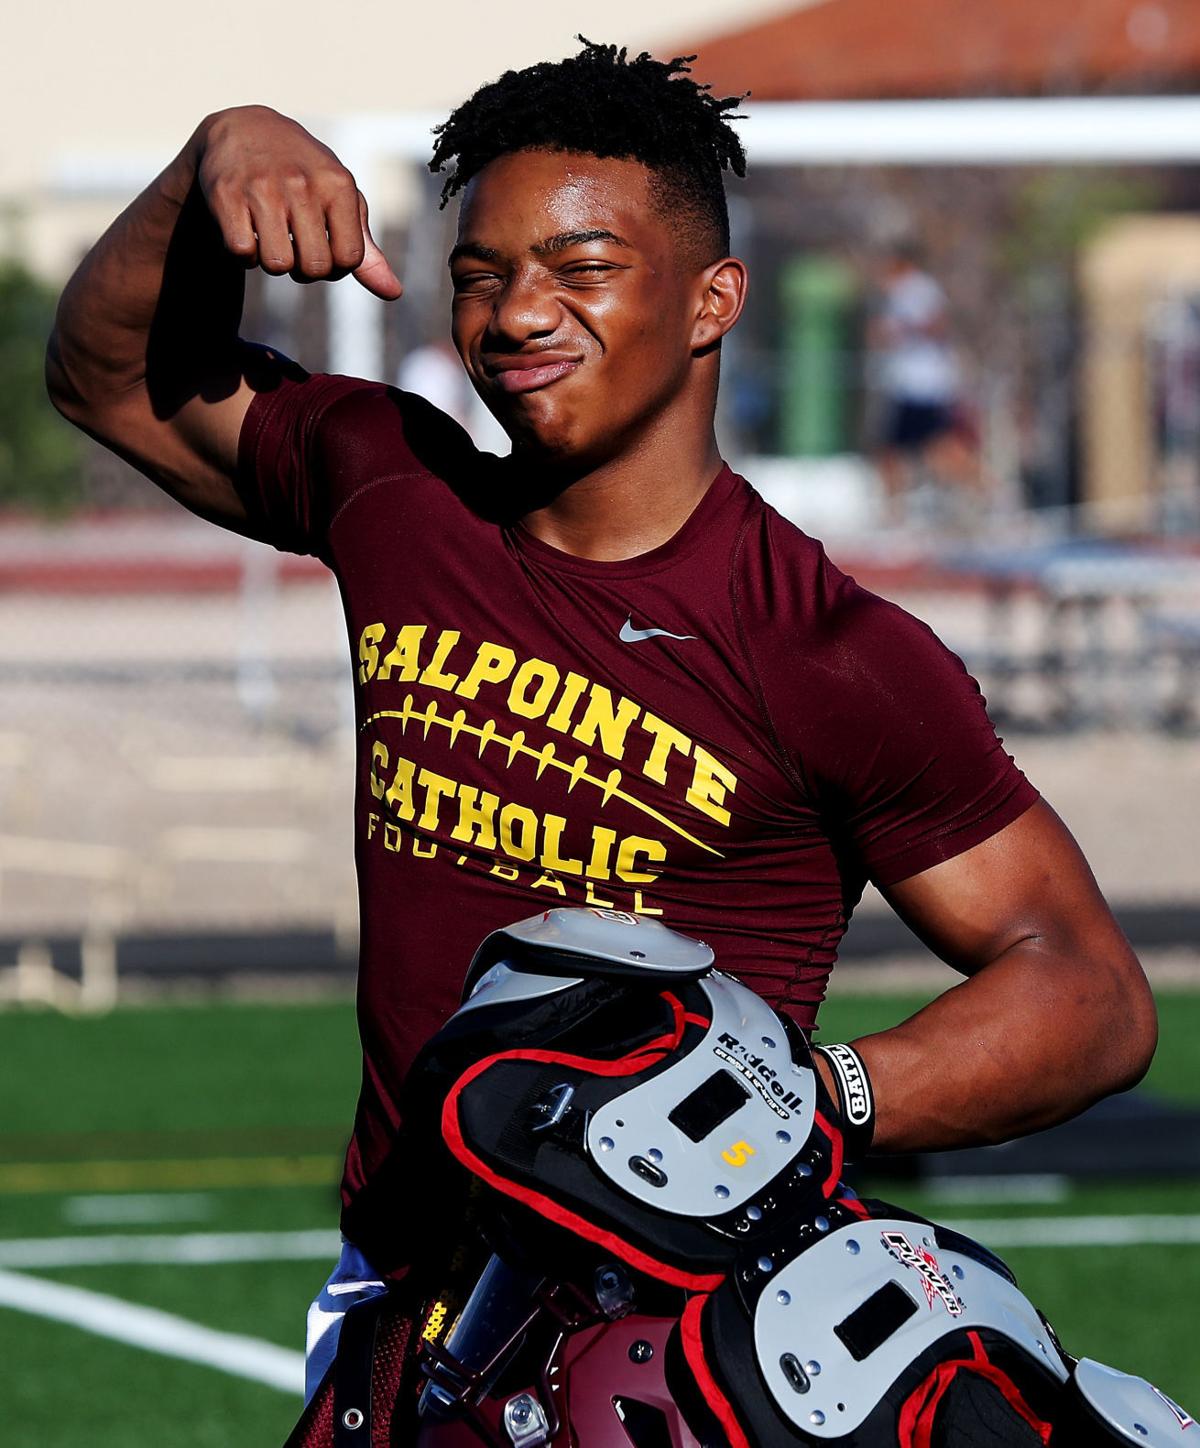 Here's why Salpointe Catholic's Bijan Robinson is the next big thing in